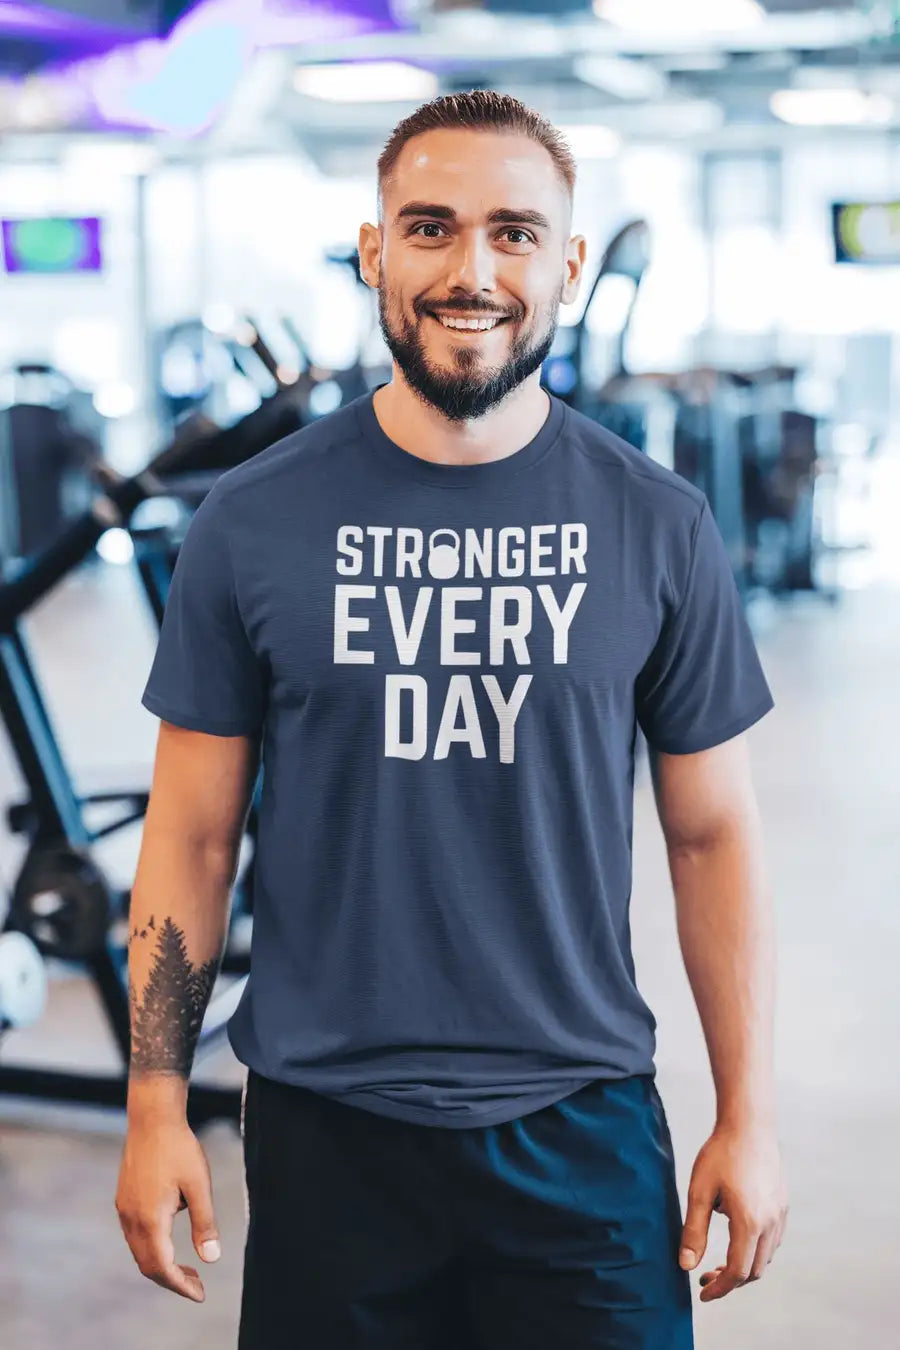 Stronger Every DayFitness Half Sleeves T Shirt for Men and Women | Premium Design | Catch My Drift India - Catch My Drift India Clothing black, clothing, general, gym, made in india, multi co